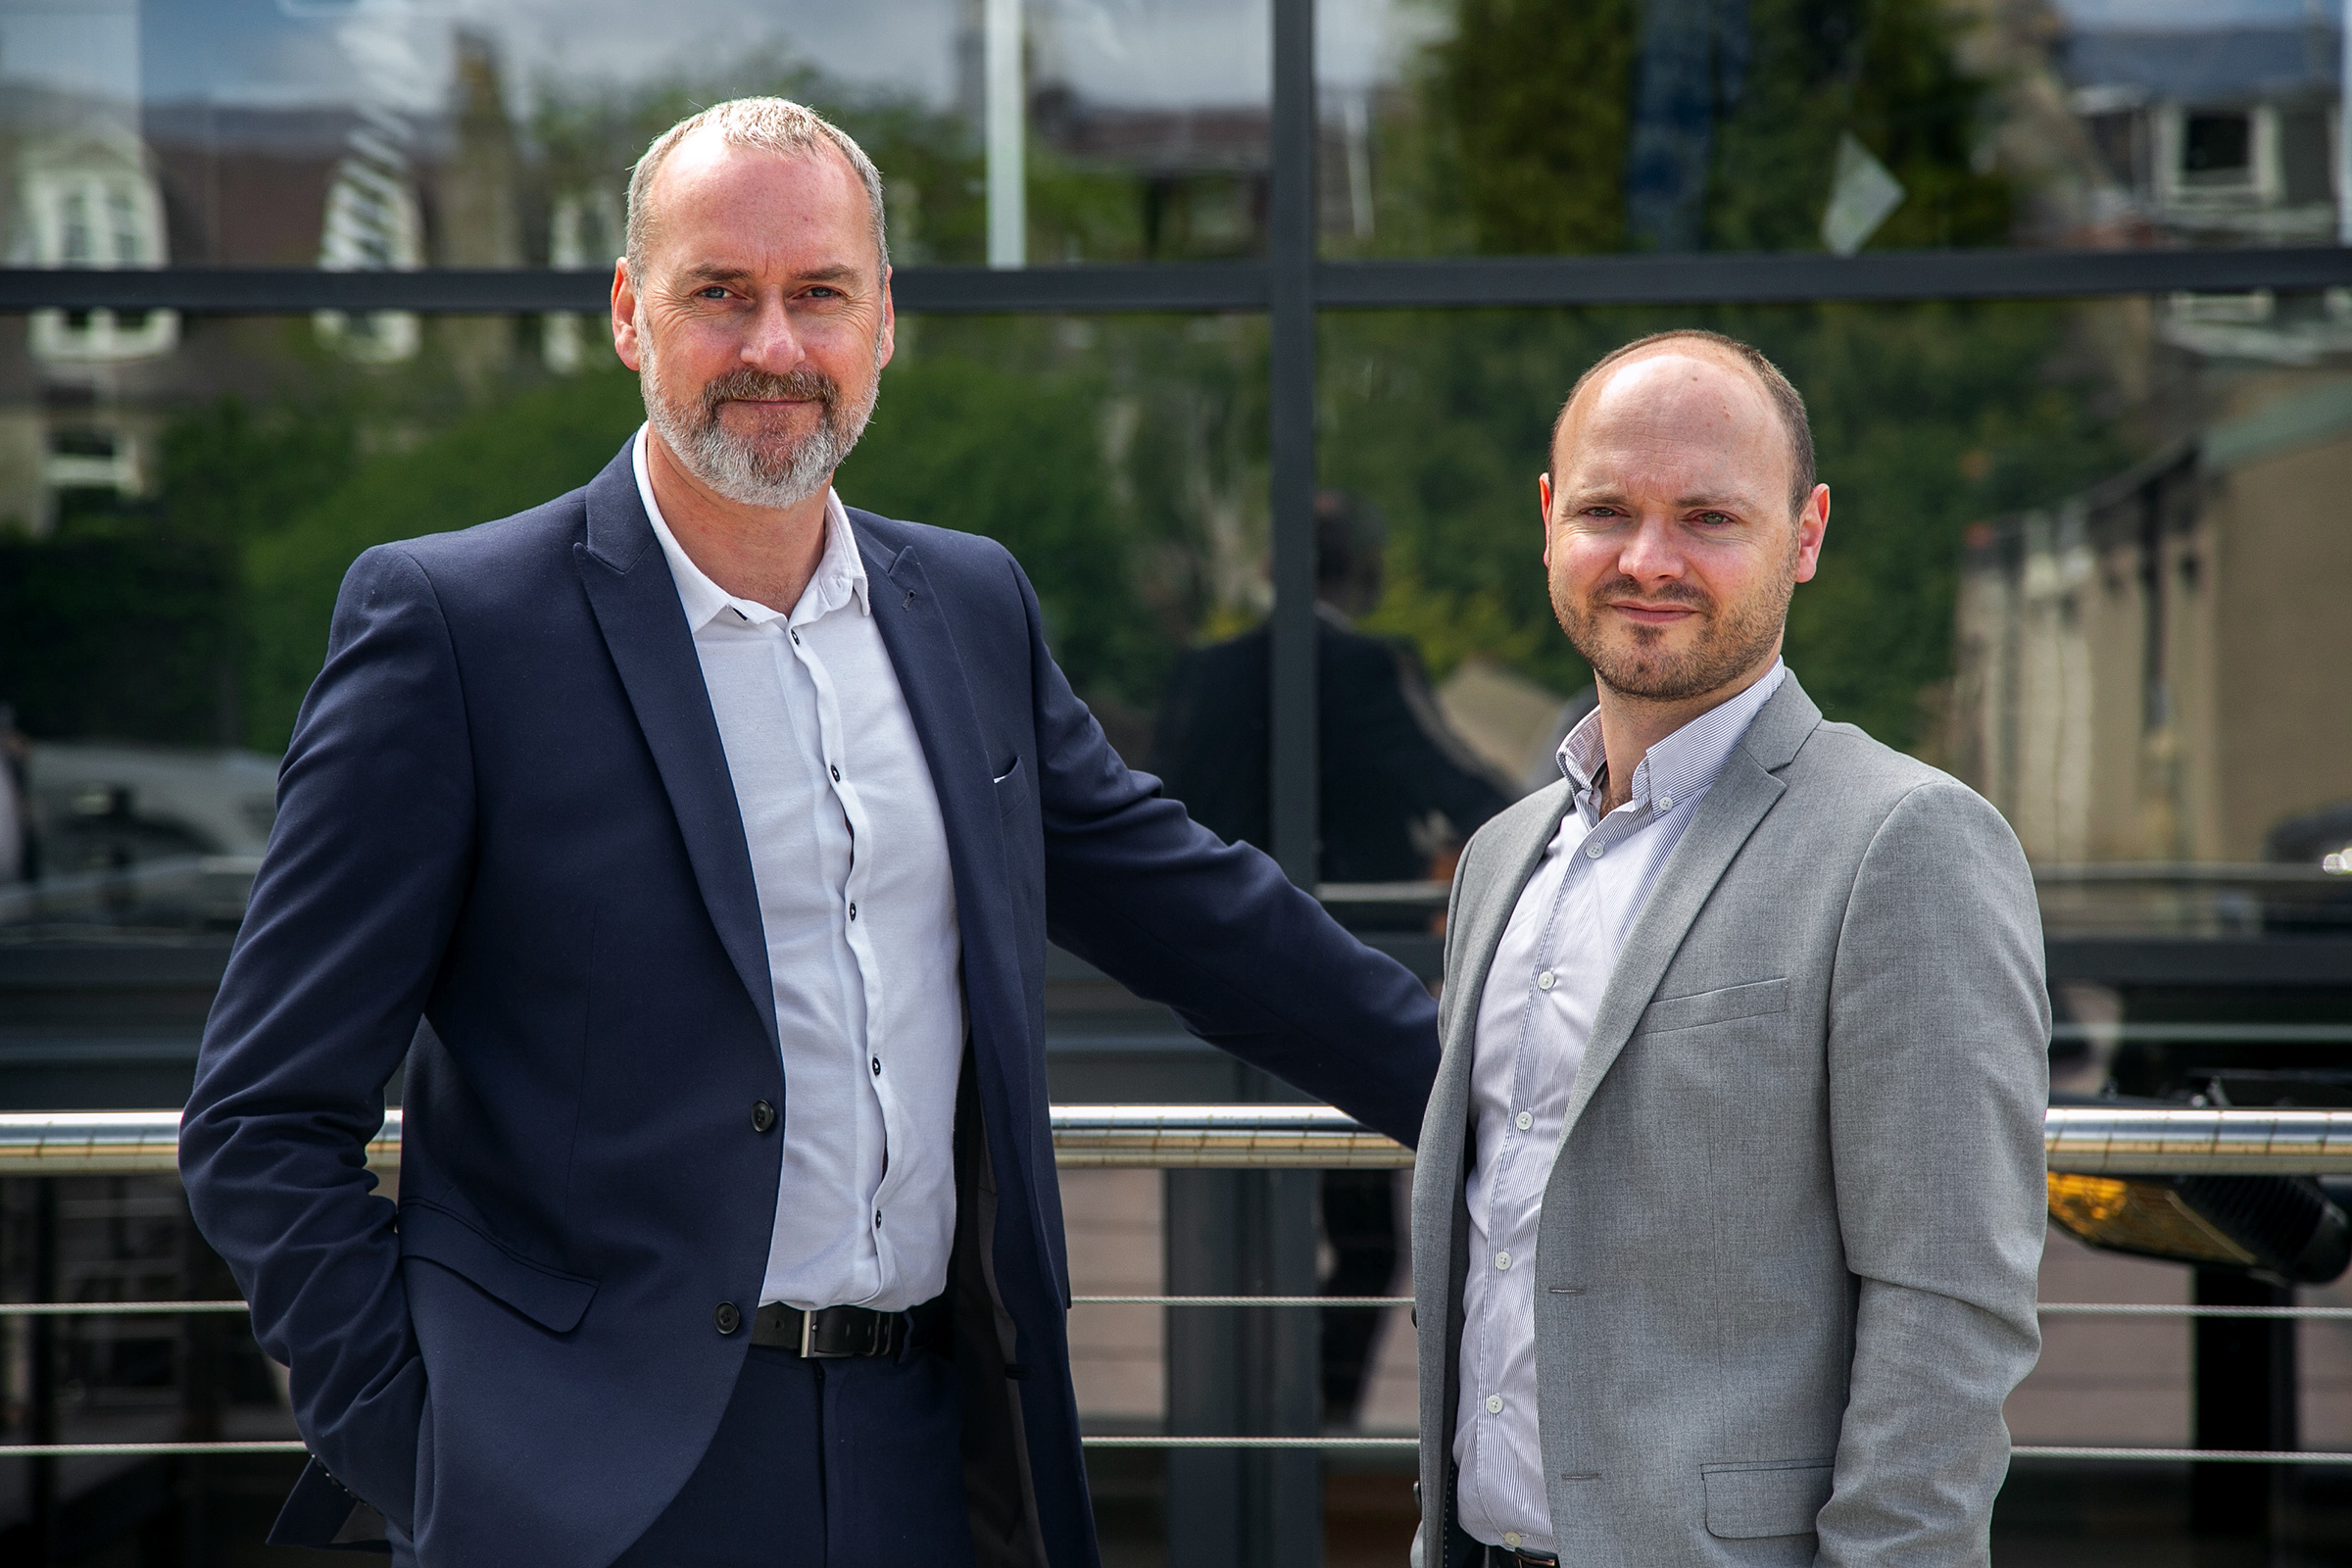 Managing director Graeme McGuire (left) and business development manager DJ Robertson of AV One Solutions at the Oil & Gas Technology Centre, Aberdeen.